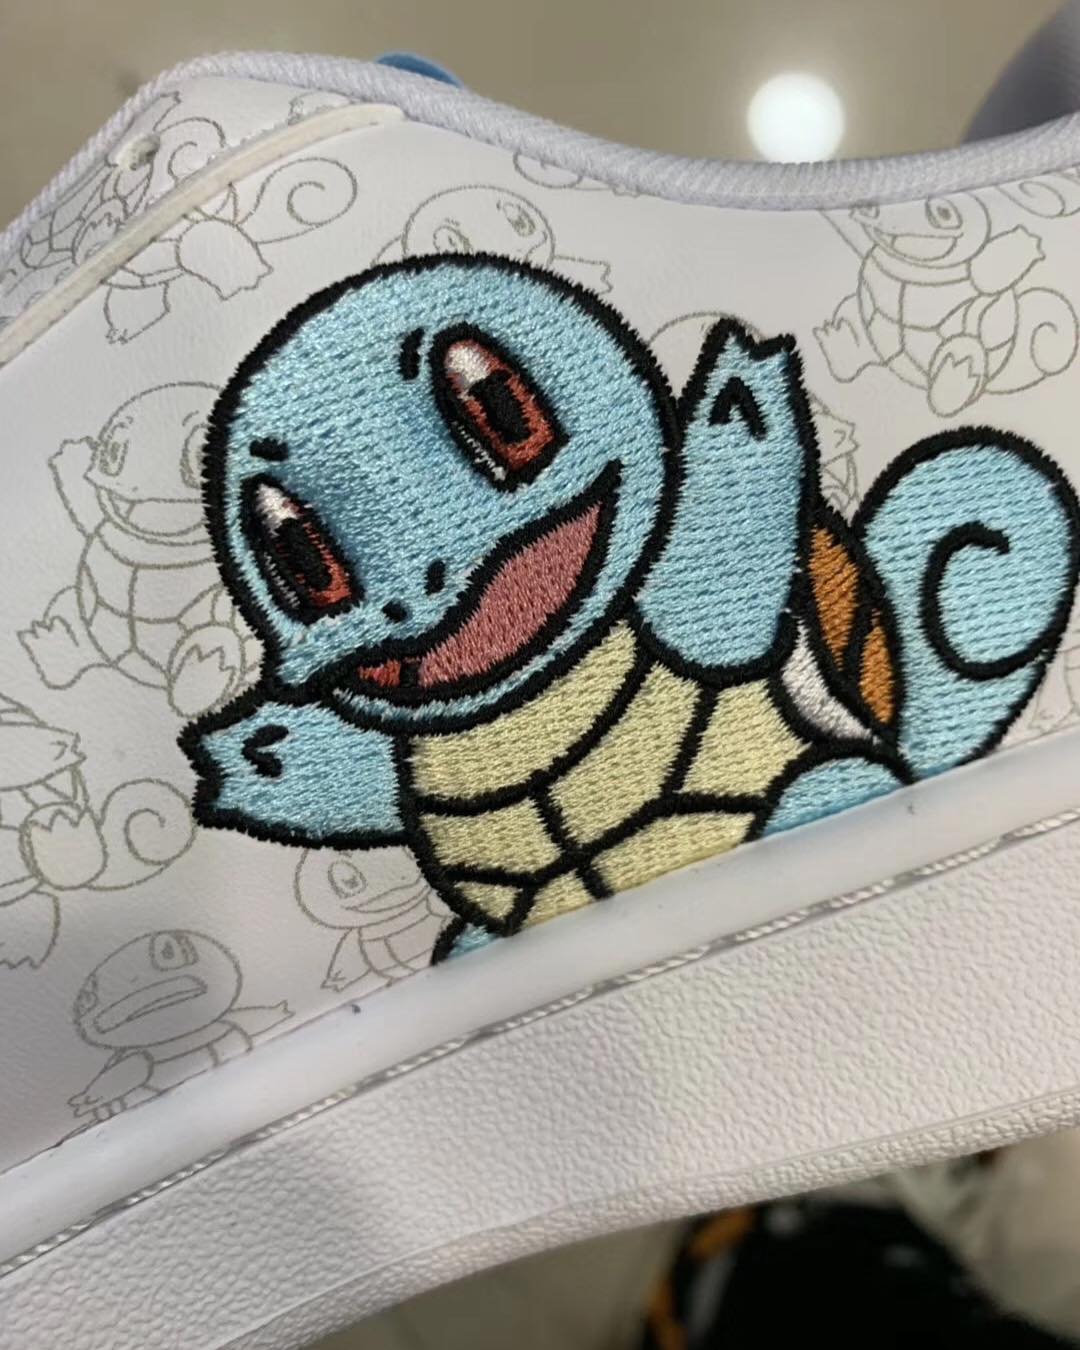 Pokemon x Adidas Collaboration 'Squirtle' (Lateral)